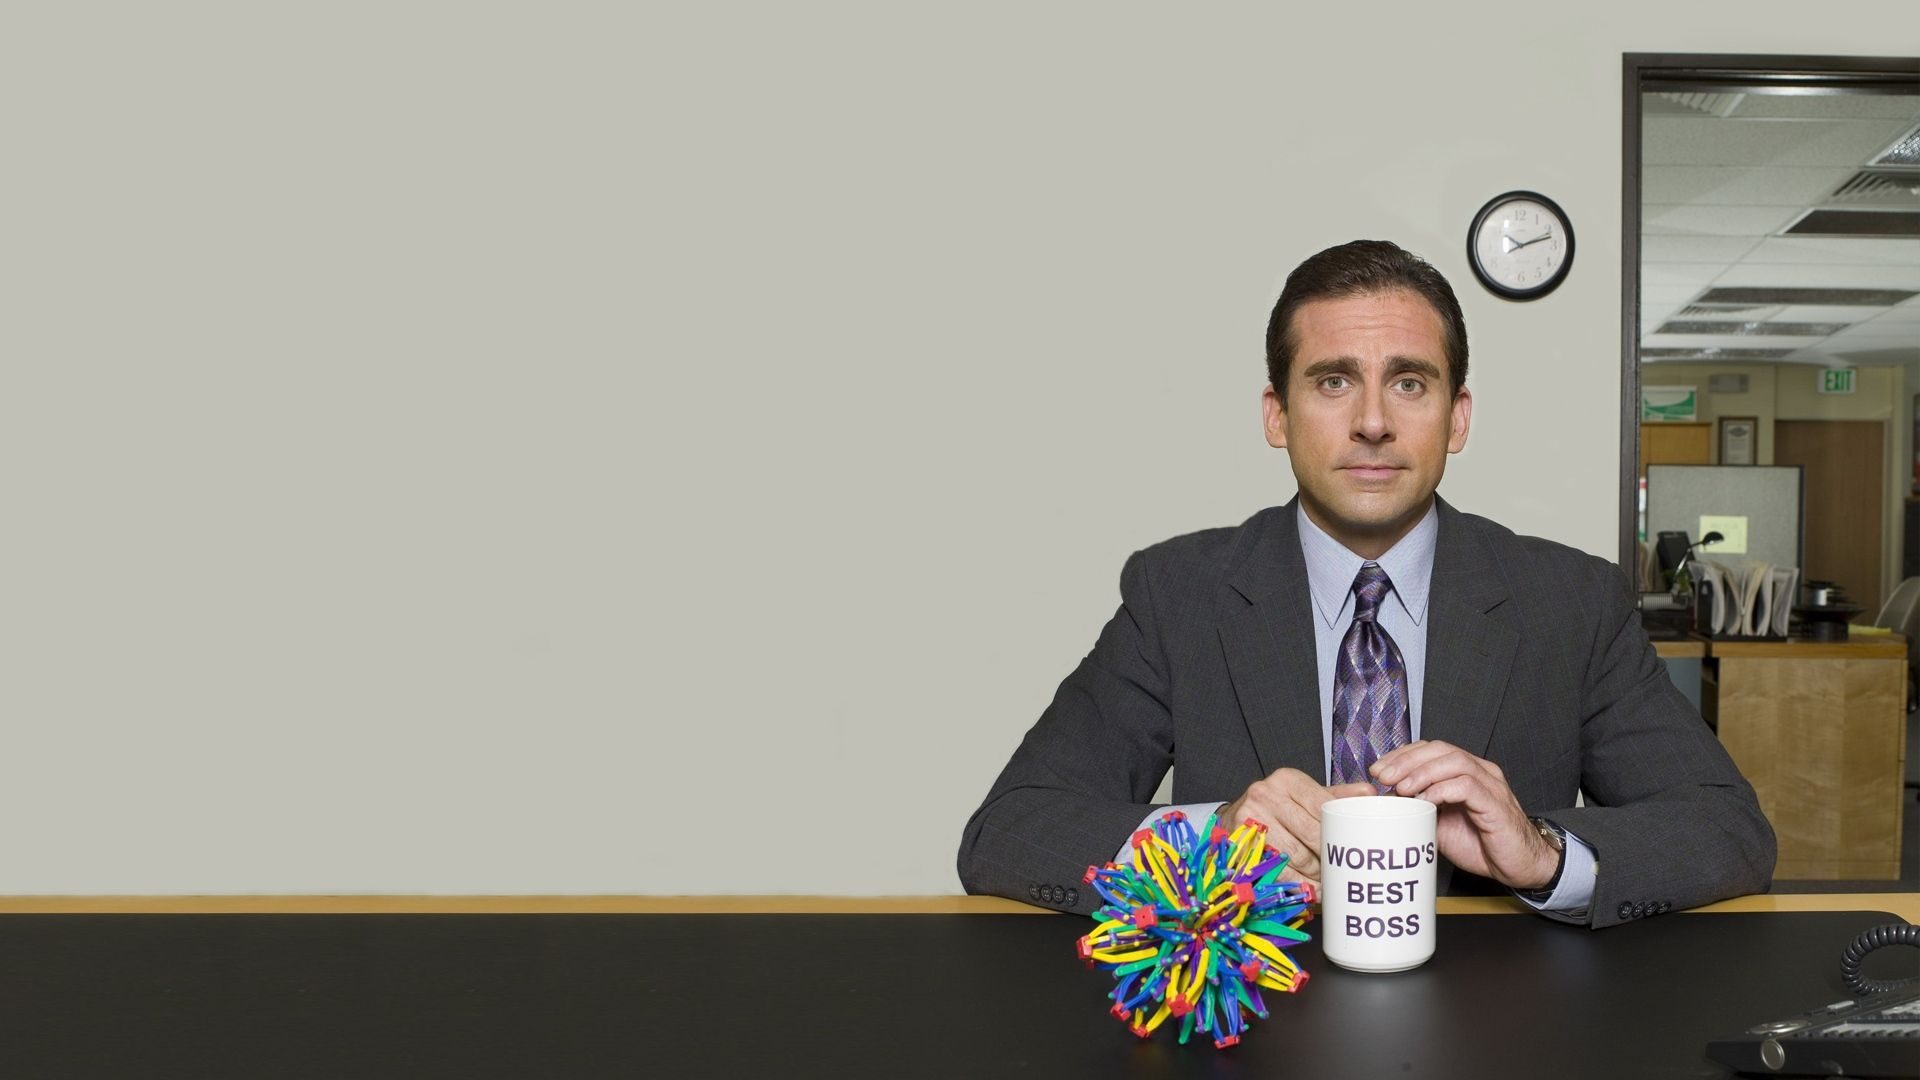 HD Wallpaper Of Michael Scott And His Worlds Best Boss Cup